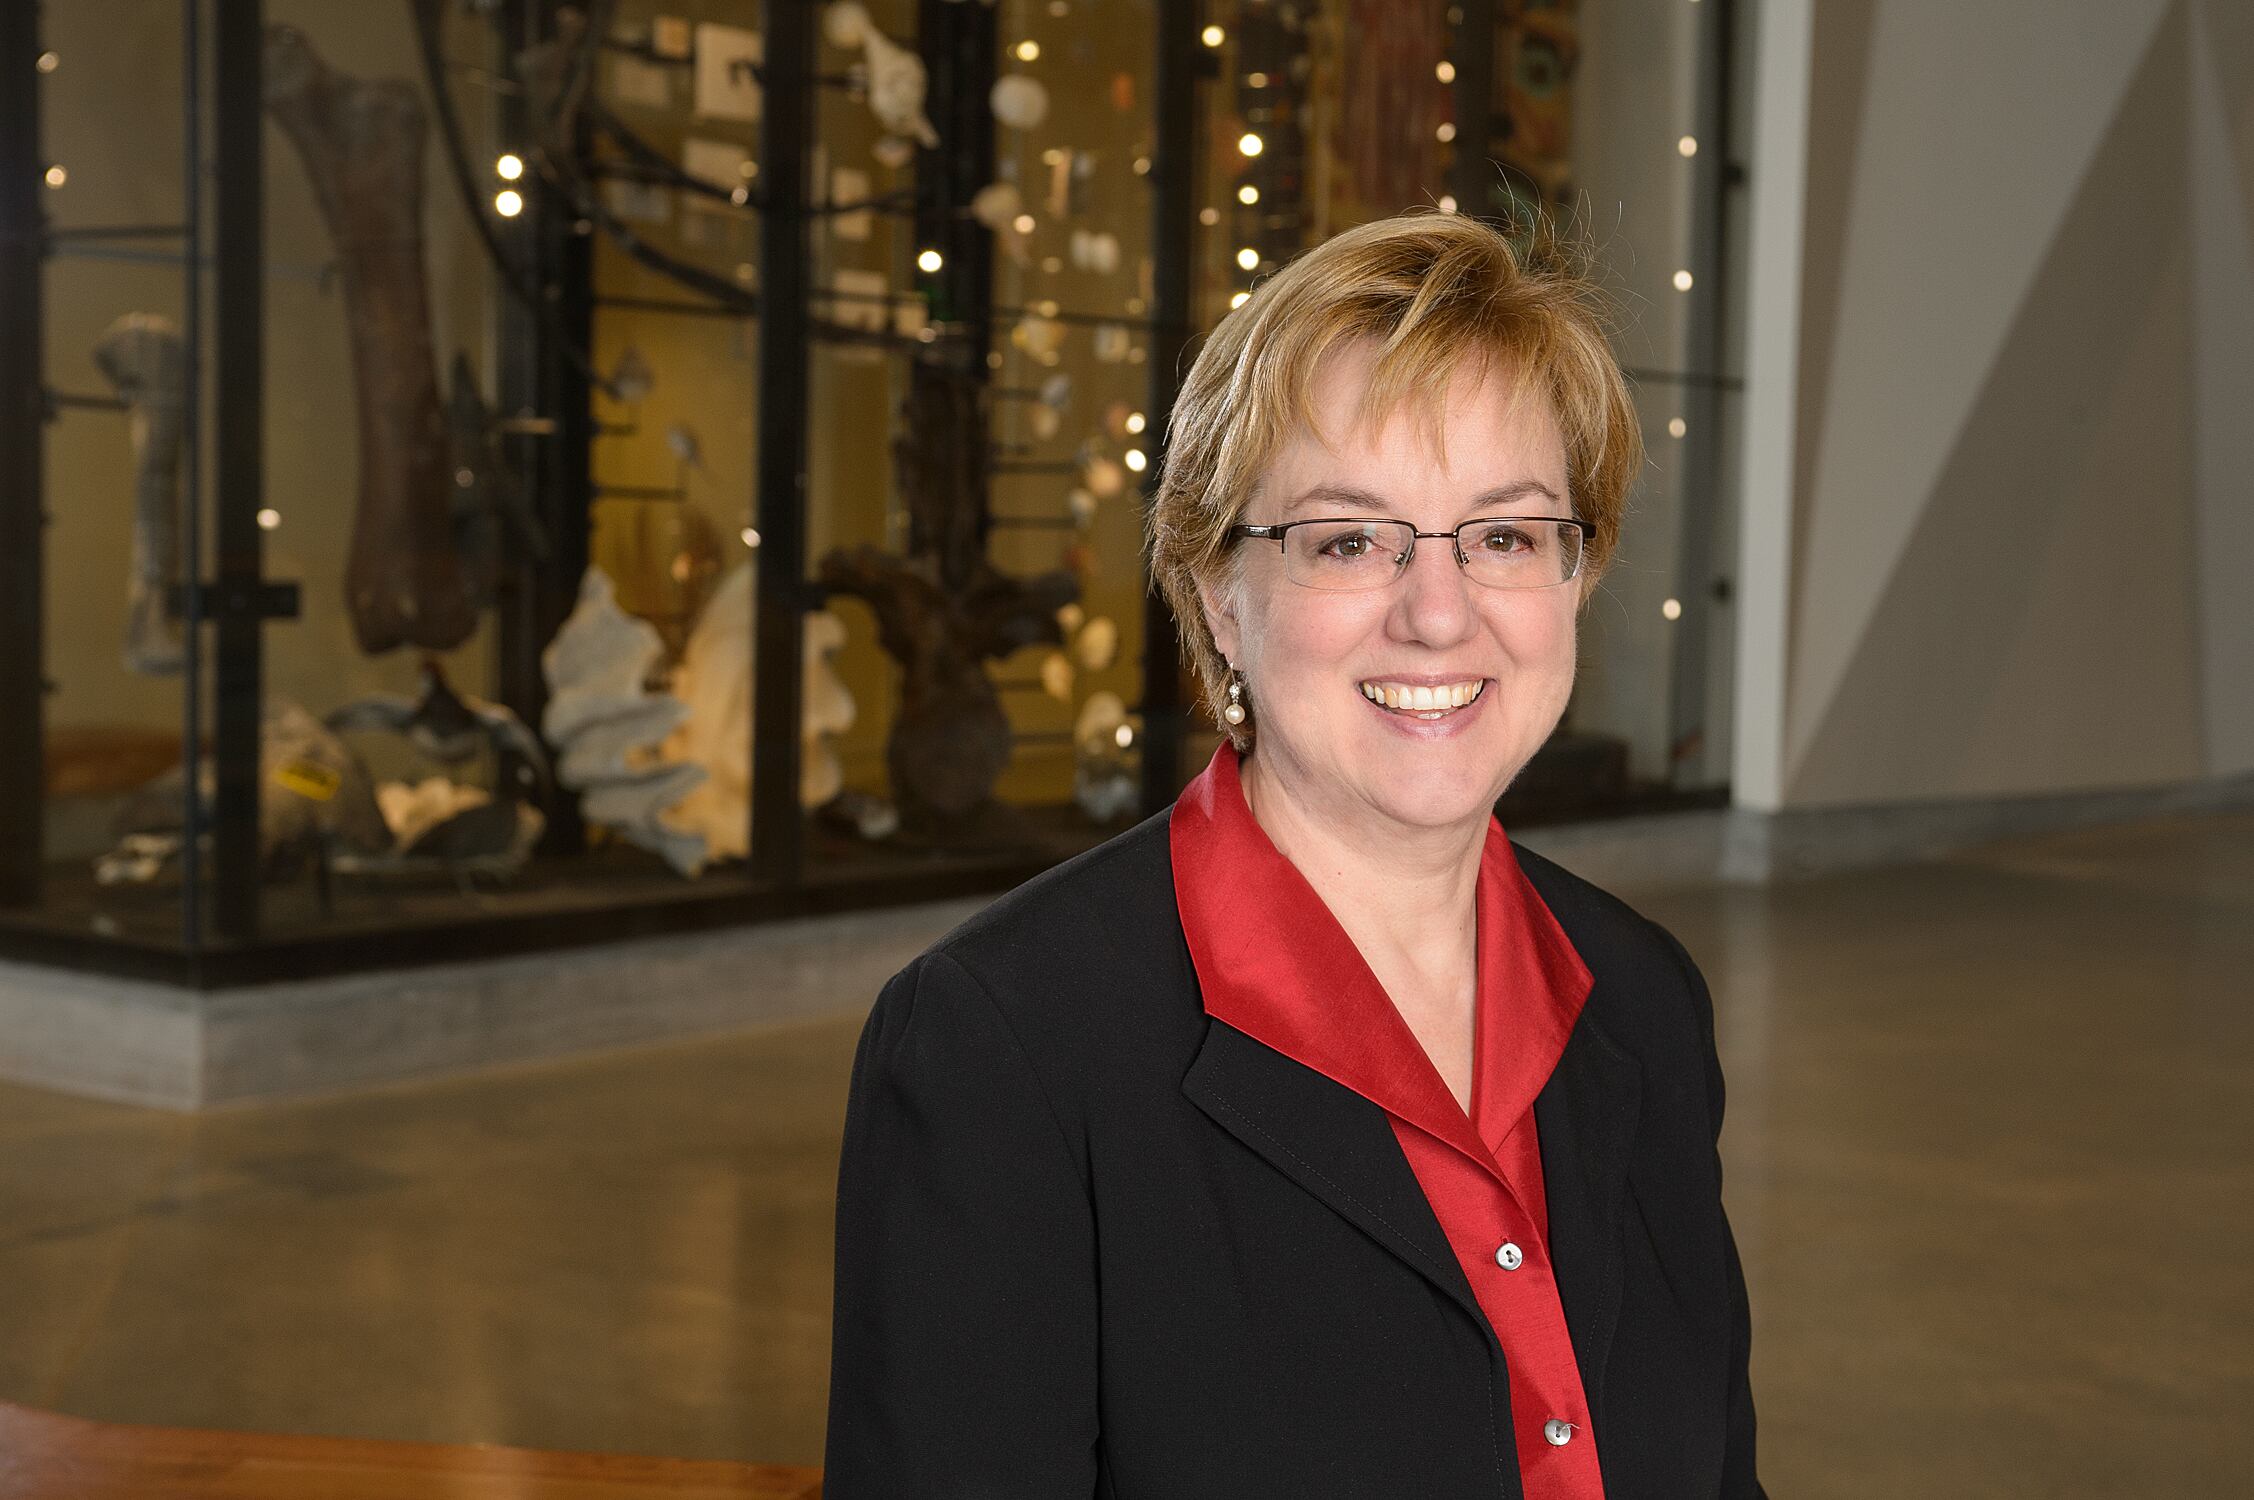 (courtesy Sarah George) Sarah George, who served as executive director of the Natural History Museum of Utah for 27 years, joined the board of directors of The Salt Lake Tribune in October 2023.